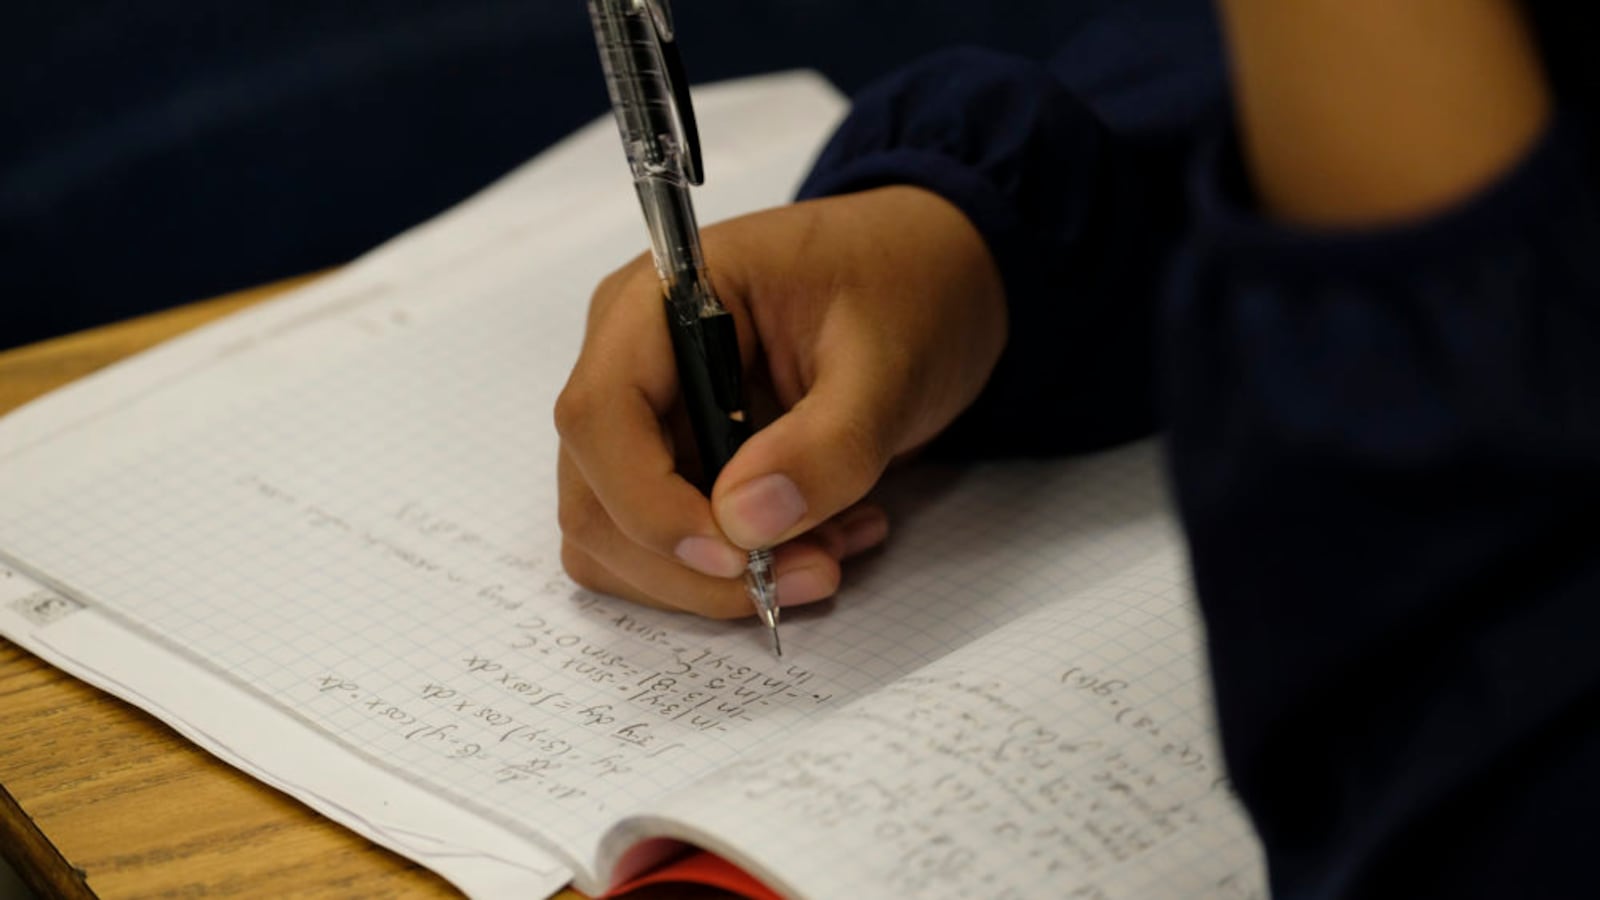 A student writes with a pen at his desk in a classroom.